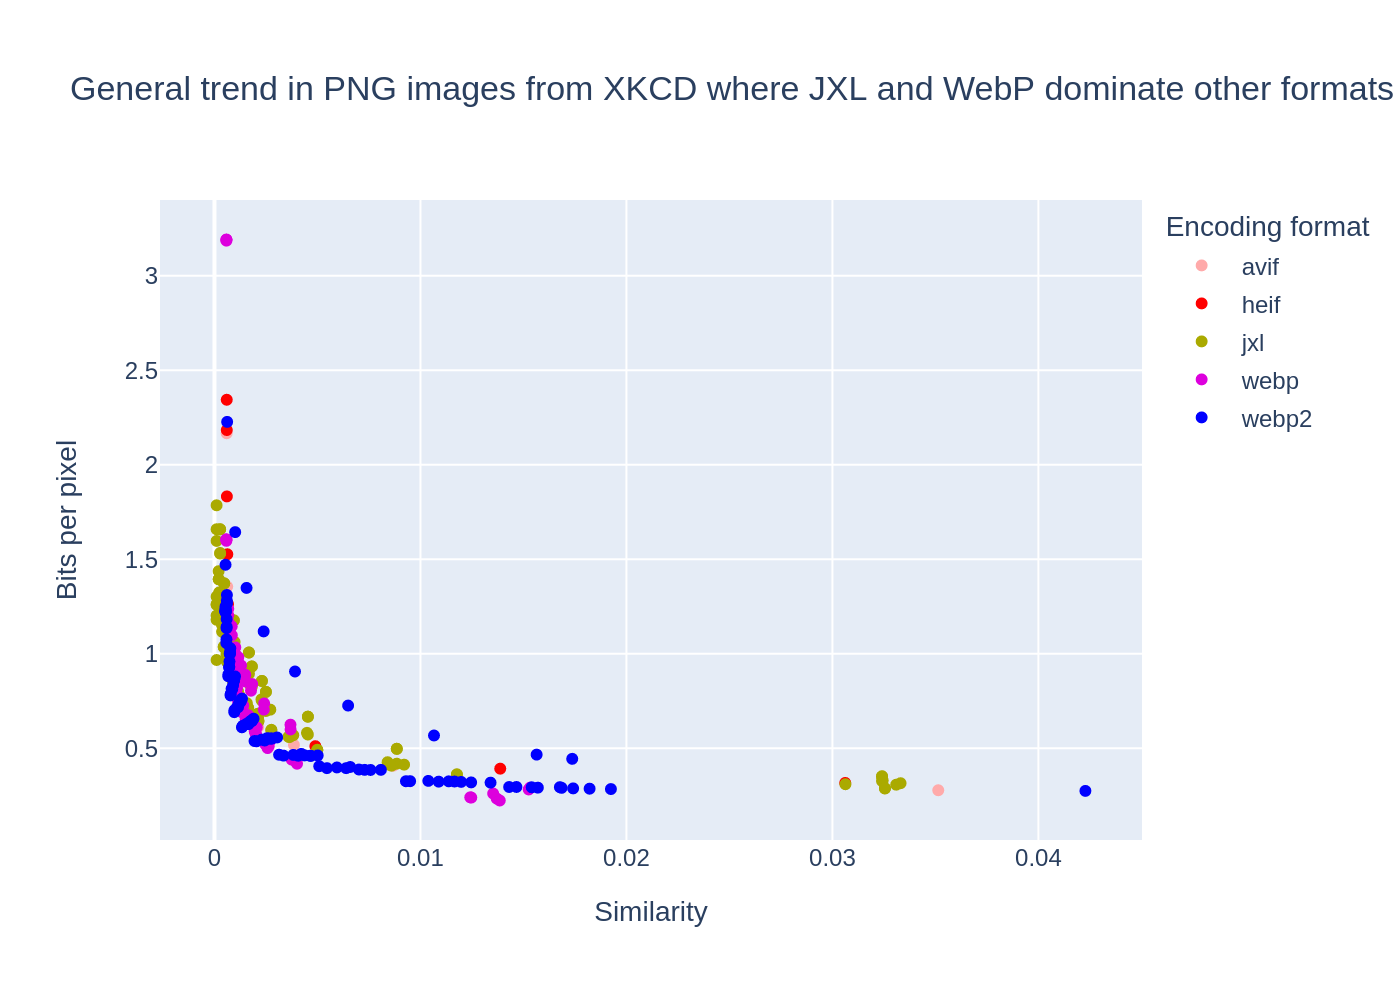 Trend in PNGs from XKCD, where WebP and JXL alternately dominate the other formats, compression ratio as a function of quality for the different image formats